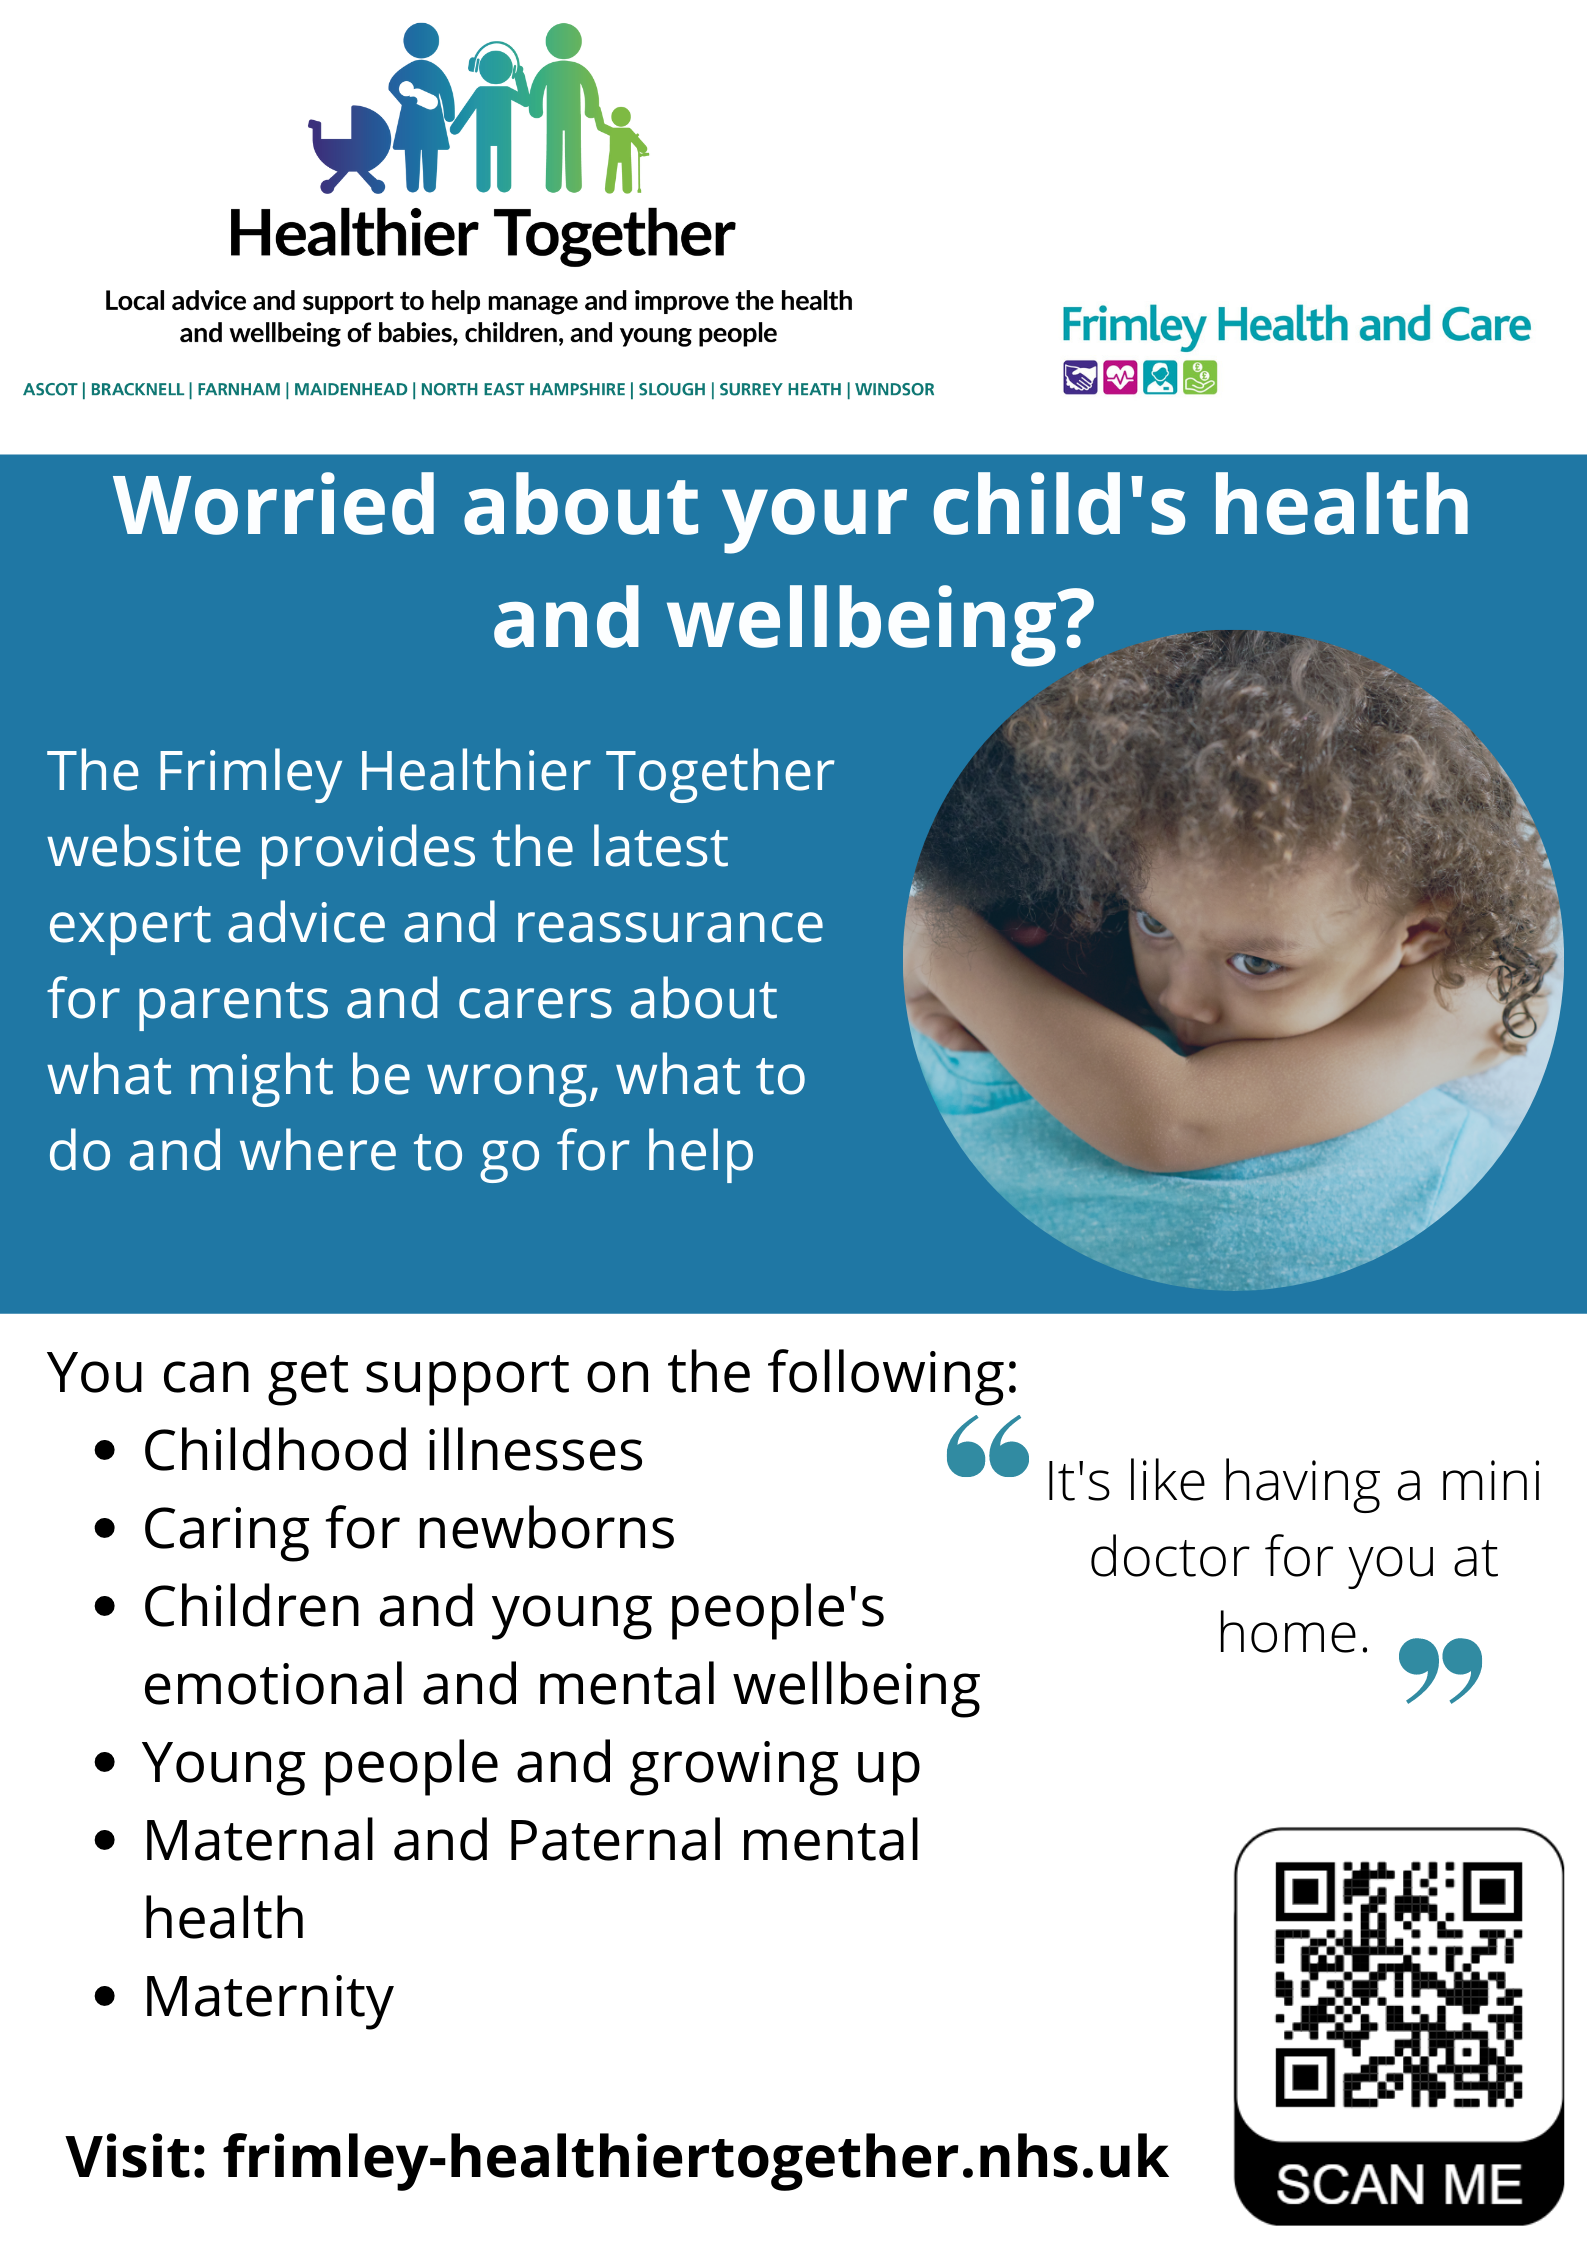 Worried about your child's health and wellbeing?